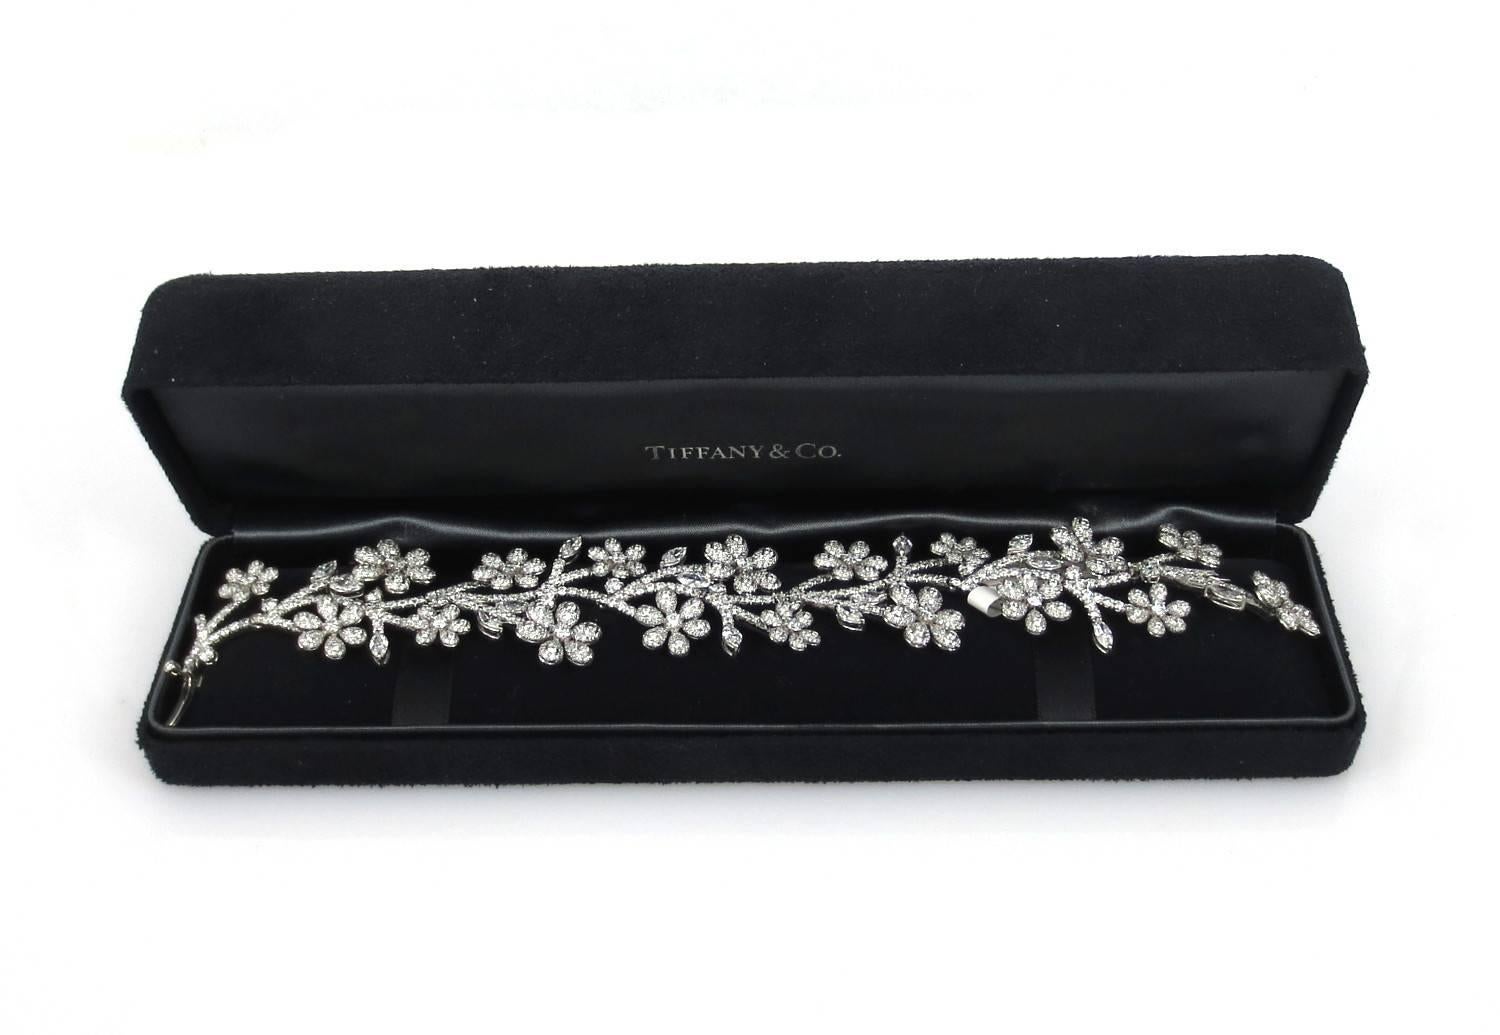 Stunning Tiffany & Co Wide Platinum Floral Estate Bracelet. Combination of Round Brilliant and Marquise Brilliant diamonds weighing approx. 30ct. Weight of the bracelet 76.5 Grams.